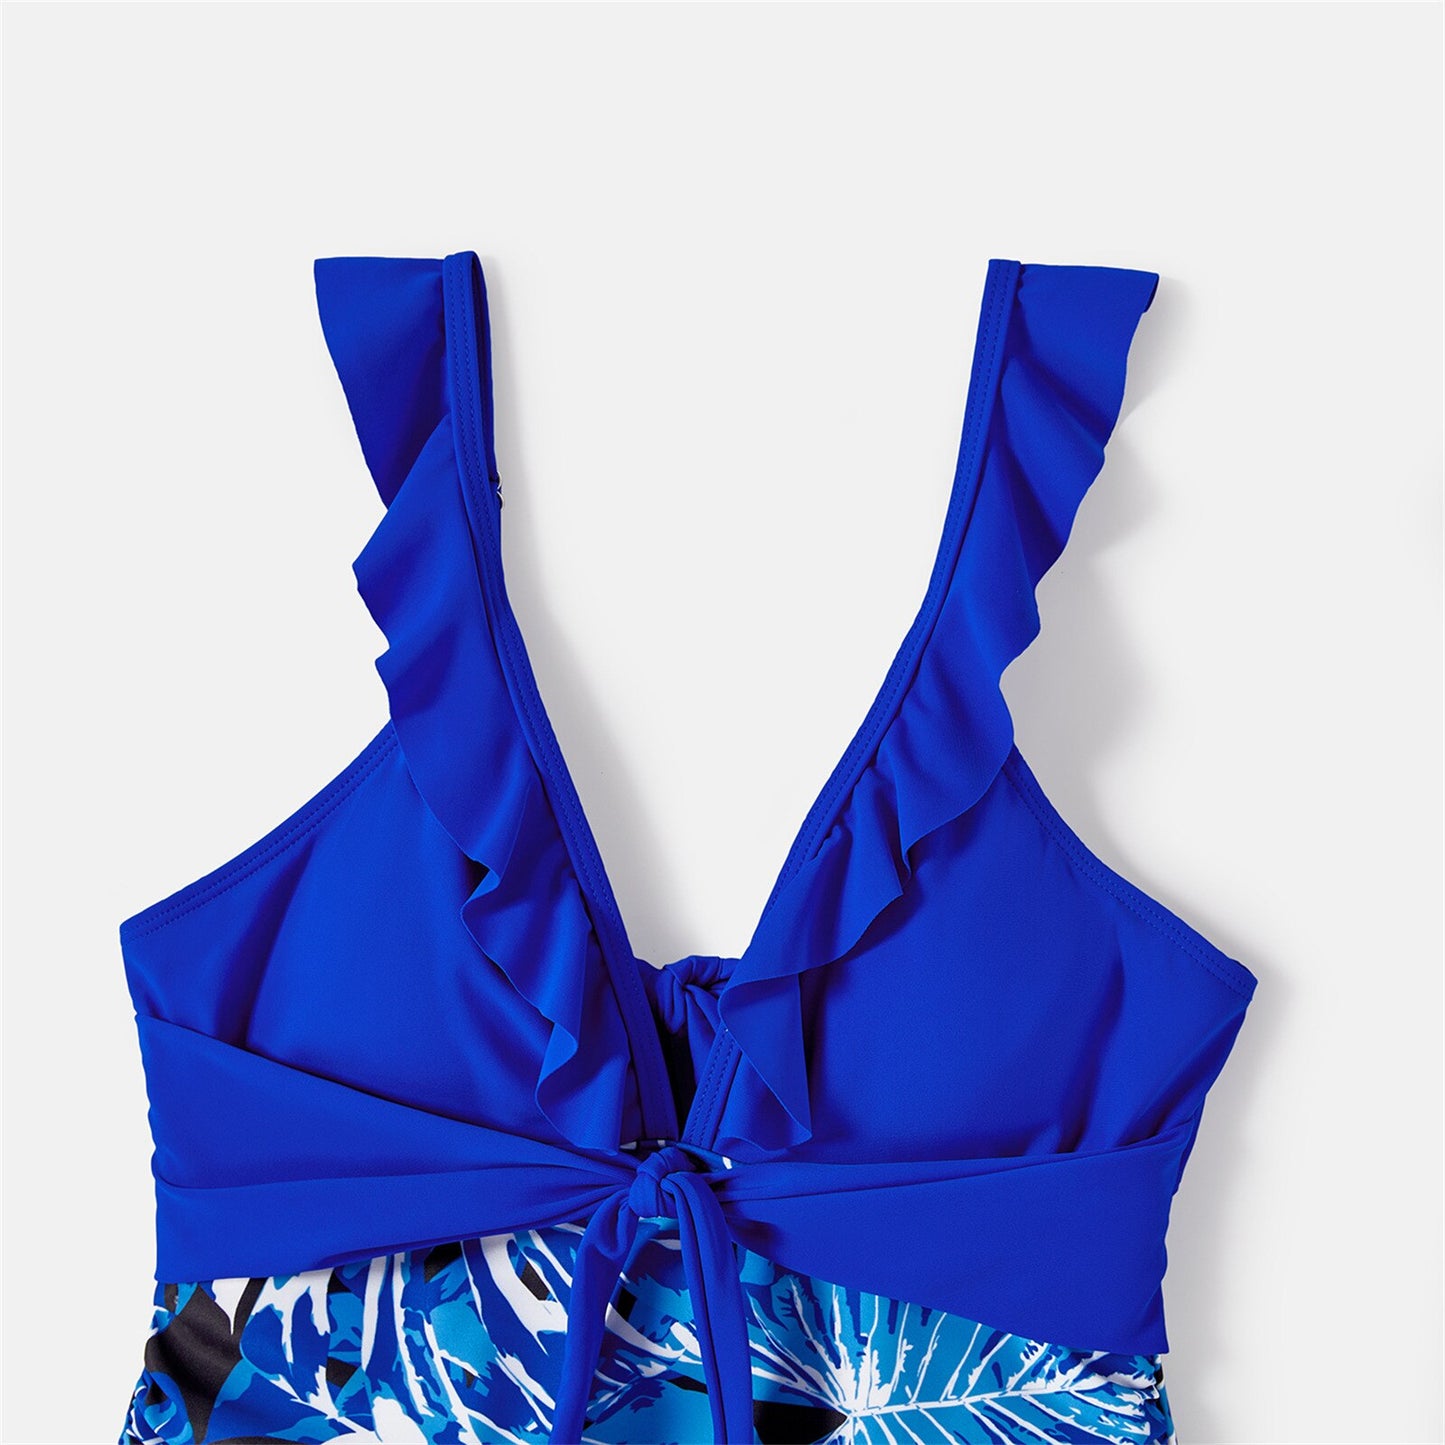 Family Matching! Plant Swim Trunks and Blue Ruffle Trim Spliced One Piece Swimsuit